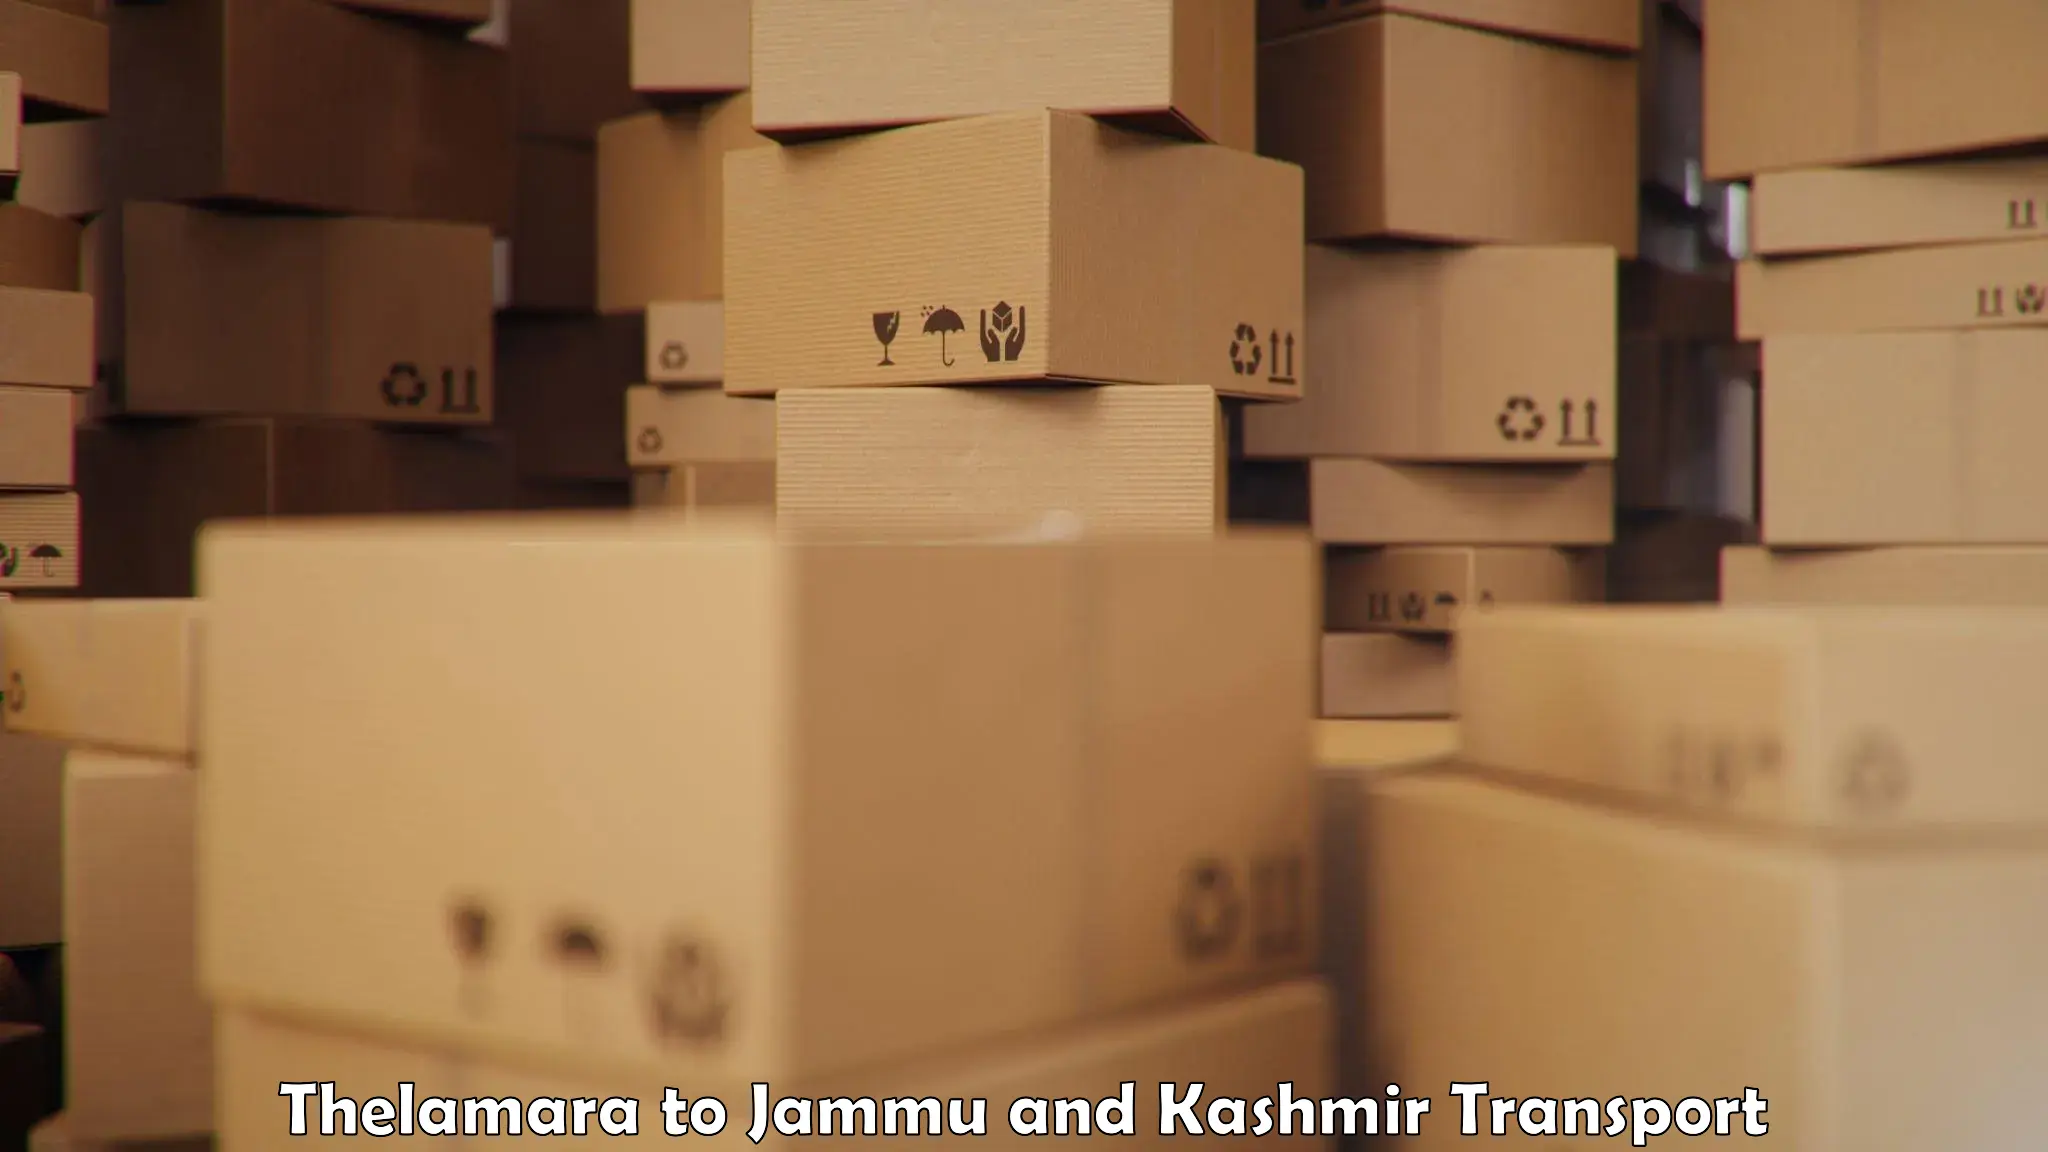 Commercial transport service Thelamara to Jammu